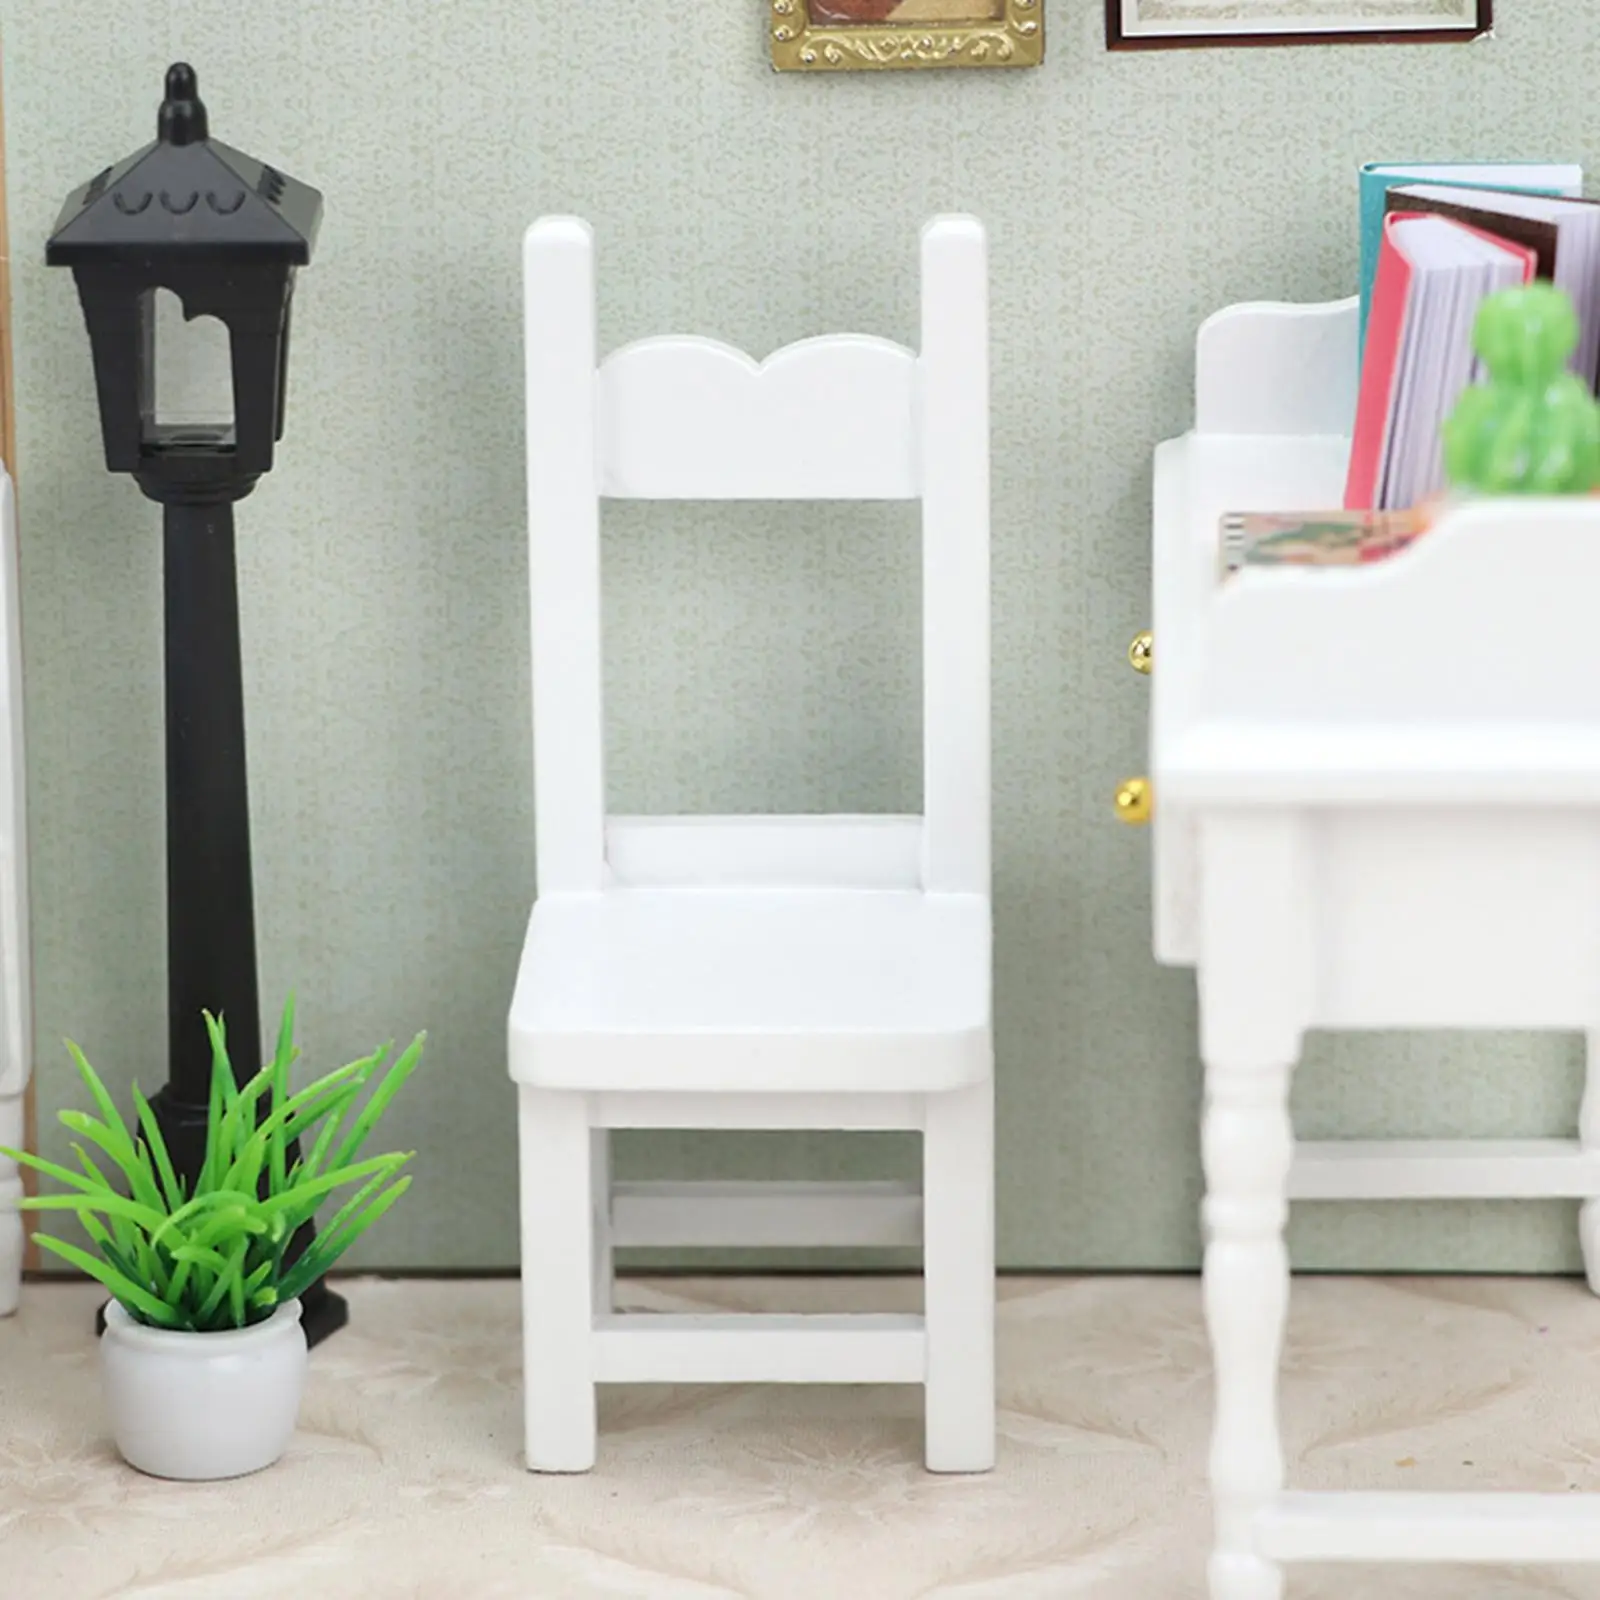 1:12TH Dollhouse Furniture Simulation Chair for Kitchen Decor Kids Gifts DIY